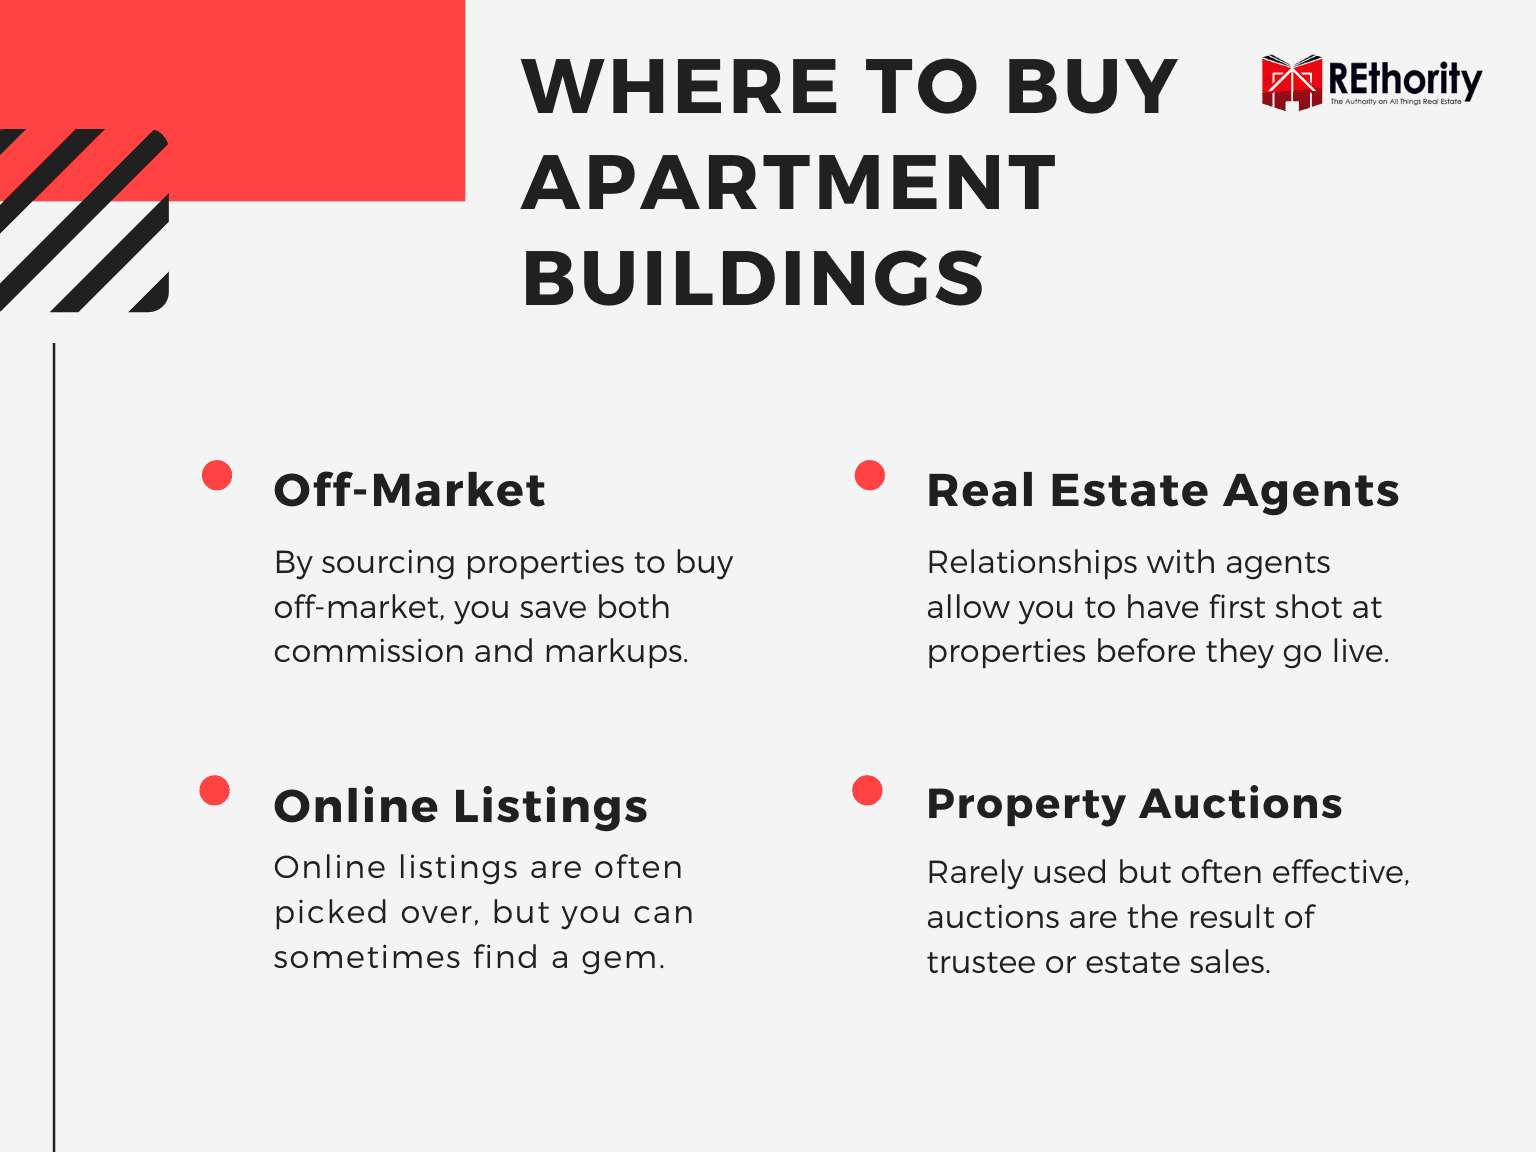 Where to find apartment buildings for sale featuring the four most popular types of ways to source a deal